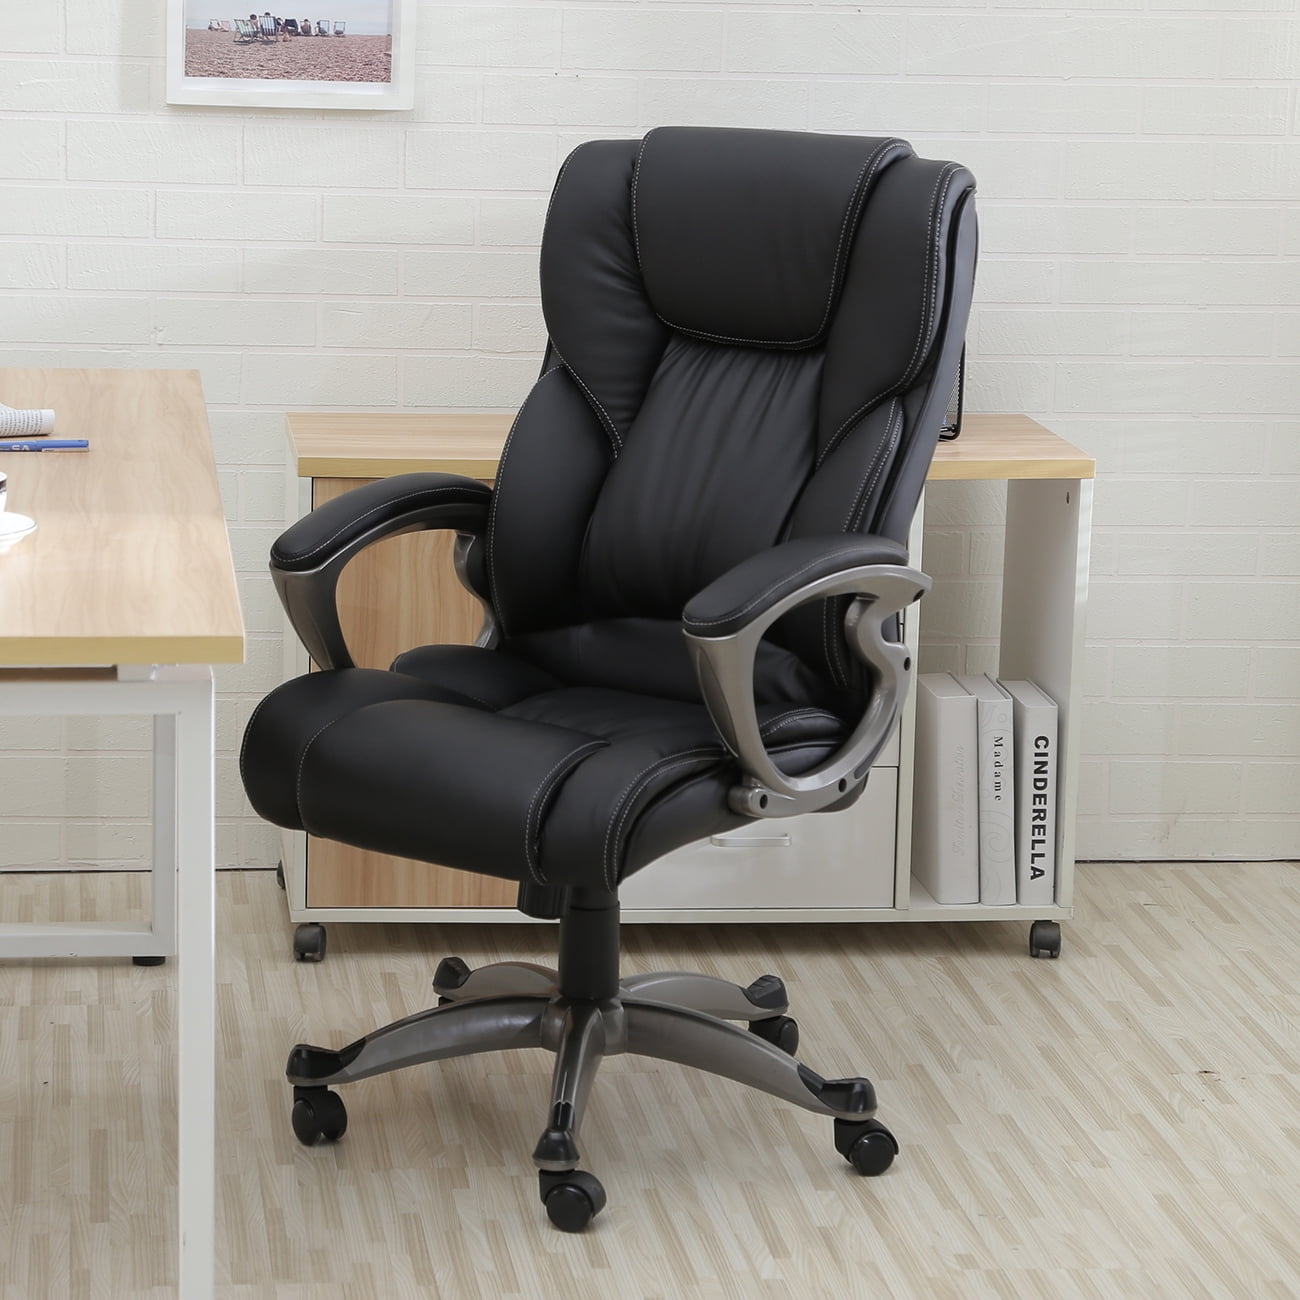 Belleze Executive Office Ergonomic, High Back Leather Executive Office Chair